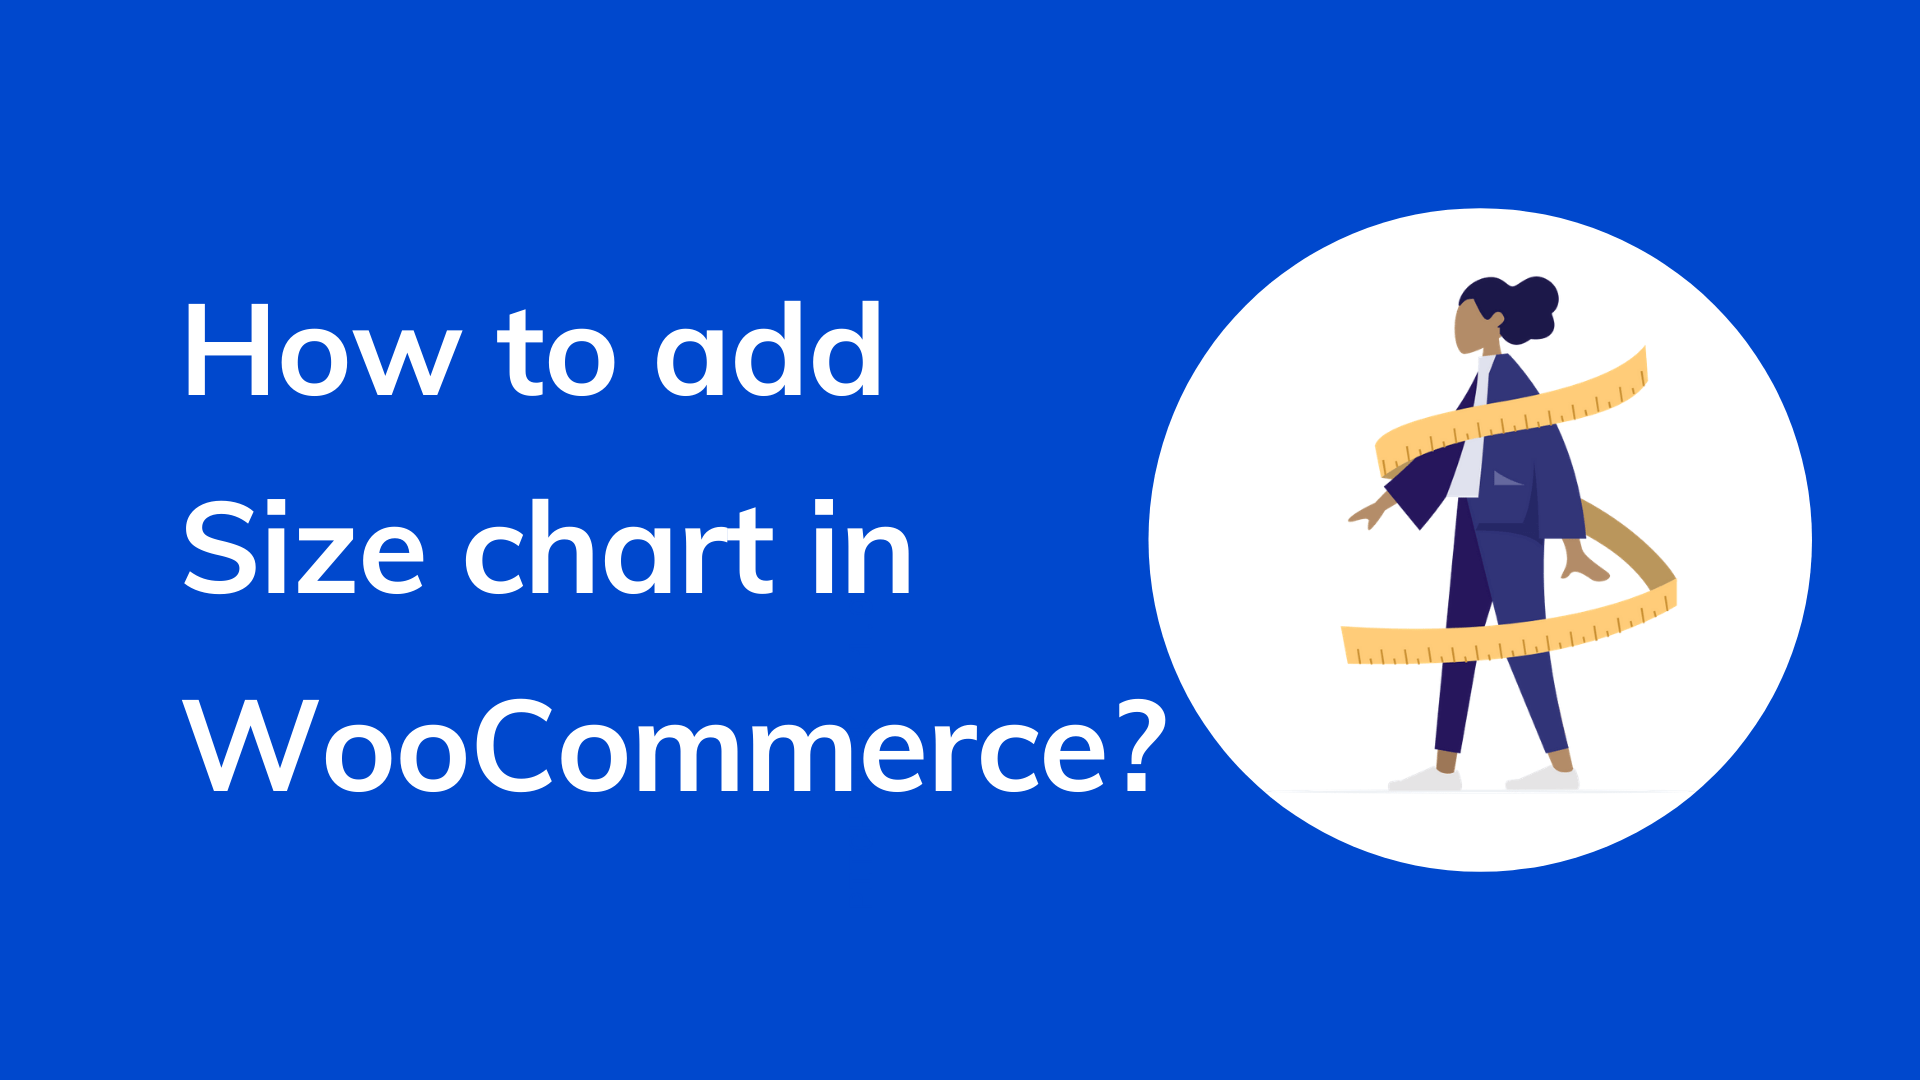 How to add a size chart in WooCommerce?